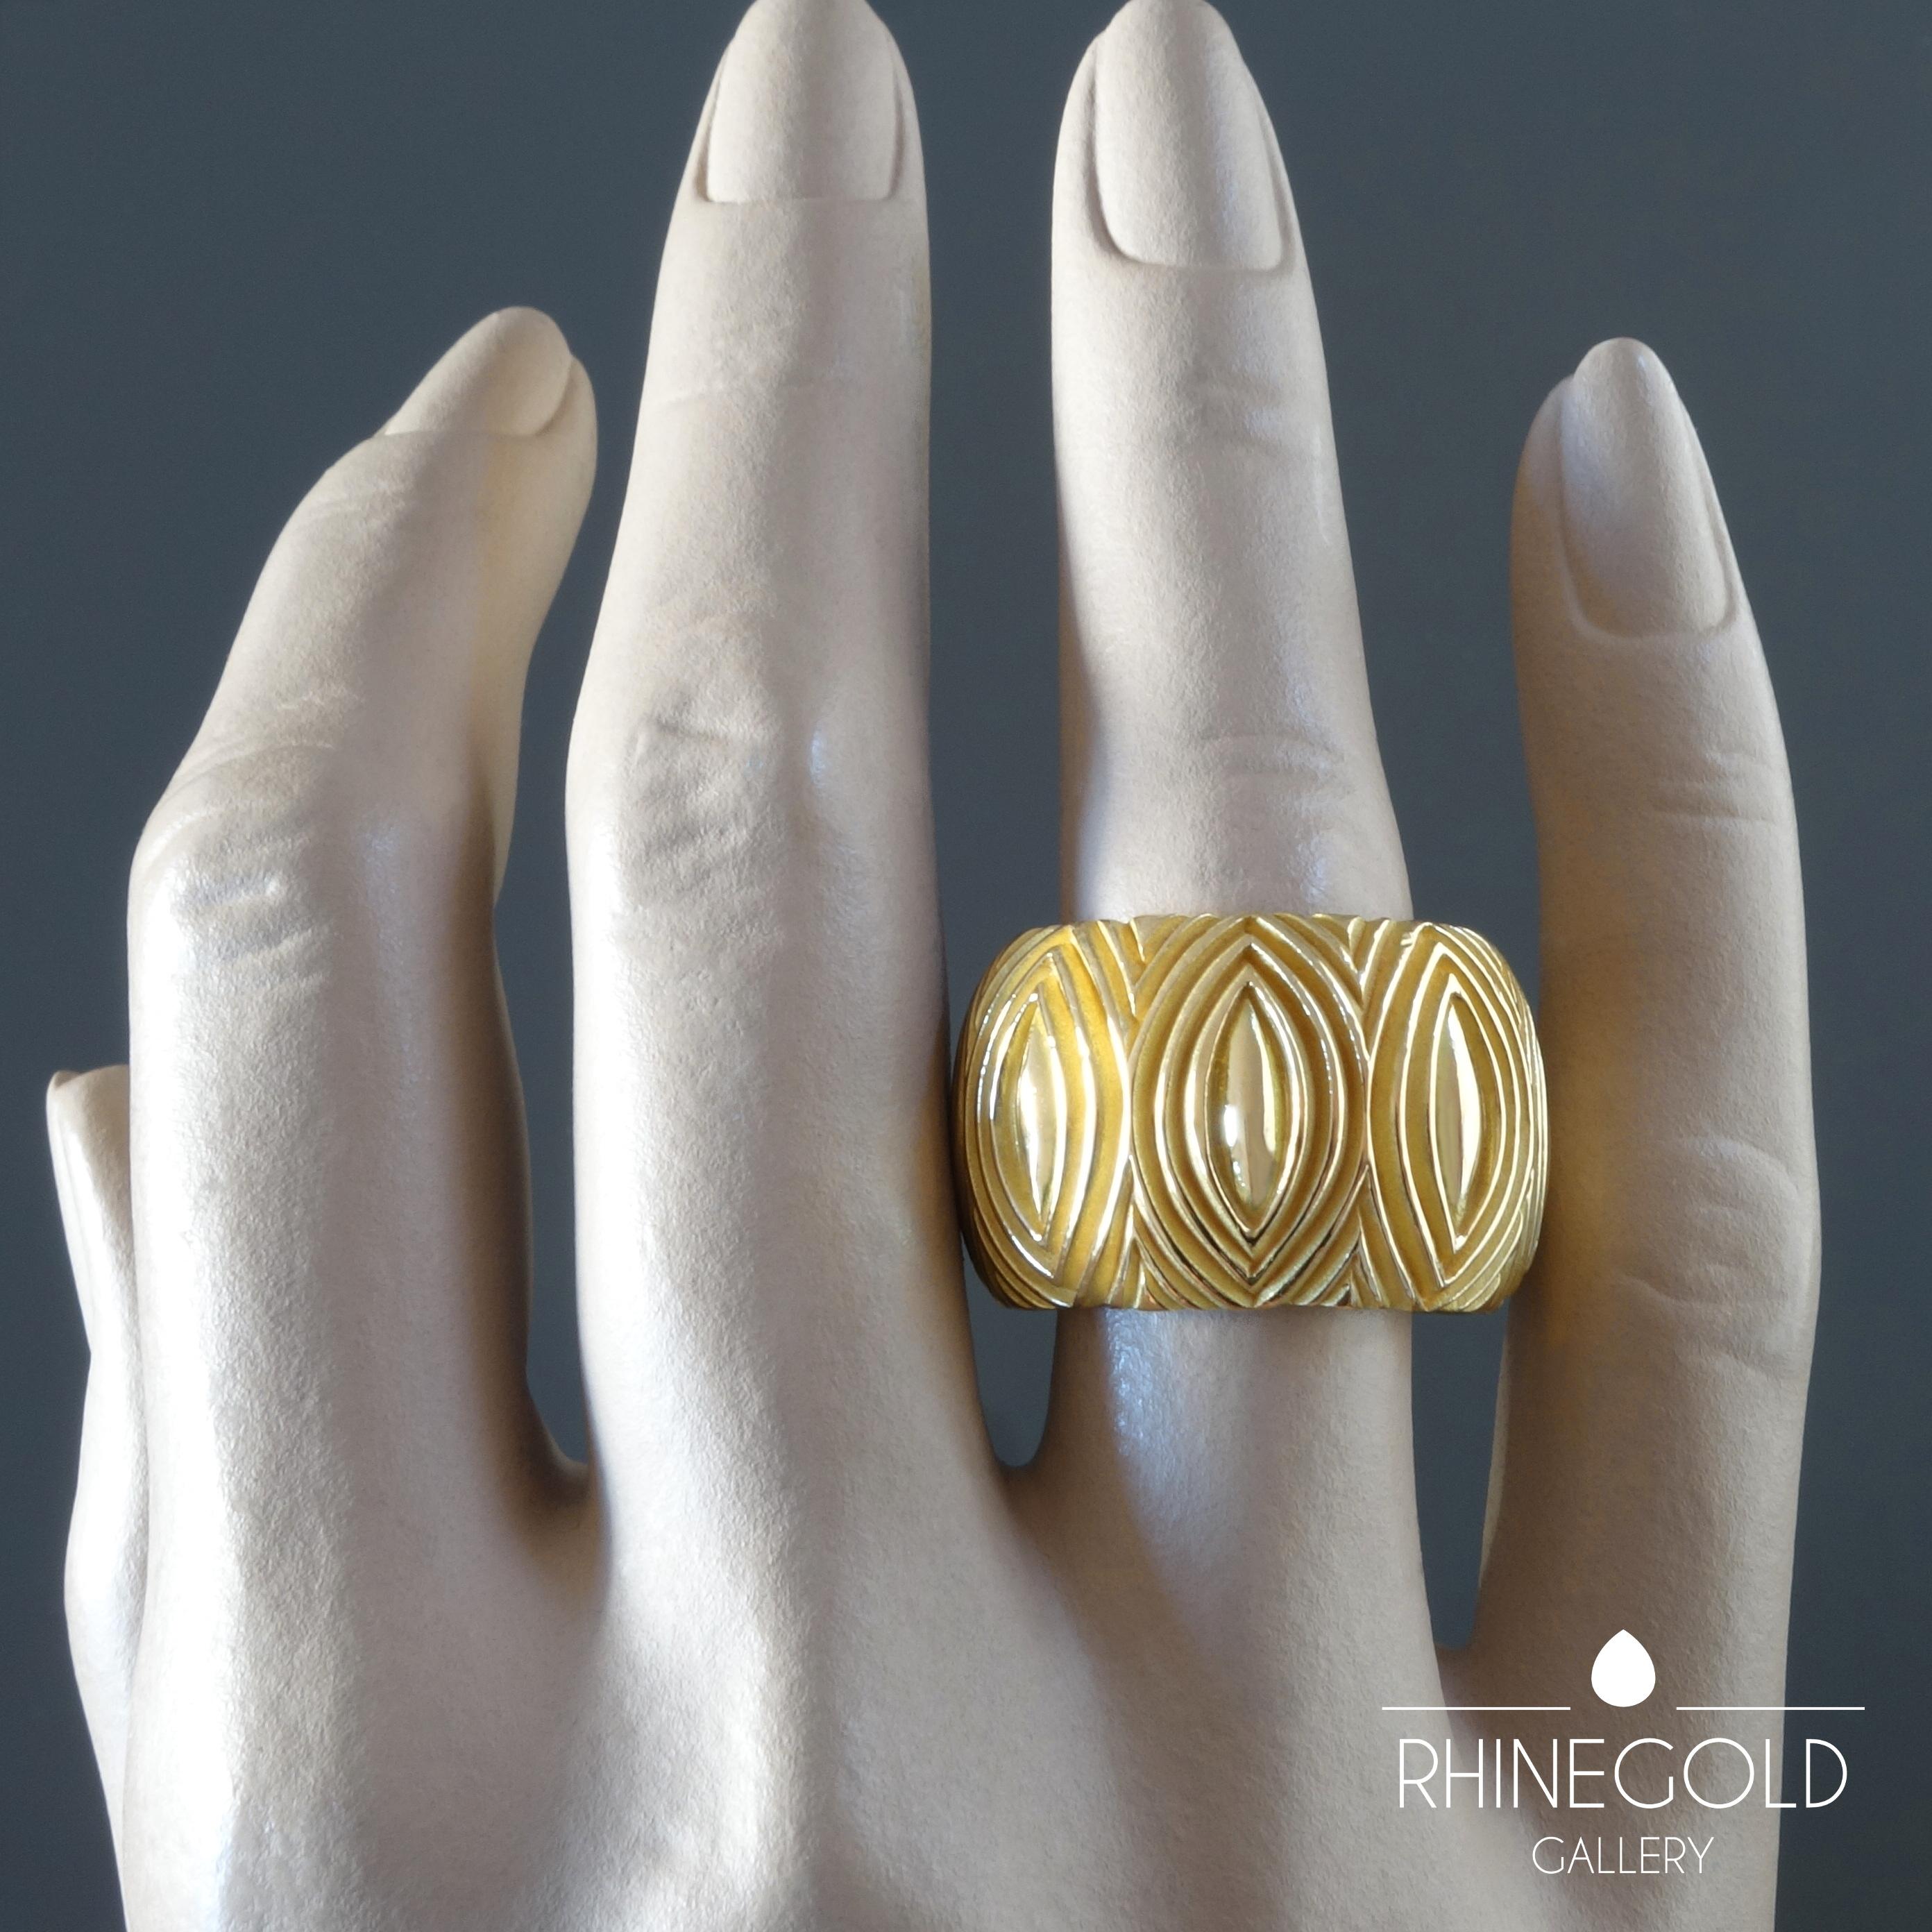 Majo Fruithof Modern Sculpted Gold Band Ring
18k yellow gold
Ring size: Ø  17.5 mm = EU 55.1 / US 7 1/4 / ASIA 14.5
Width of ring band 1.6 cm (approx. 5/8”)
Weight approx. 51.5 grams
Marks: maker’s mark; gold content mark ‘750’ for 18k